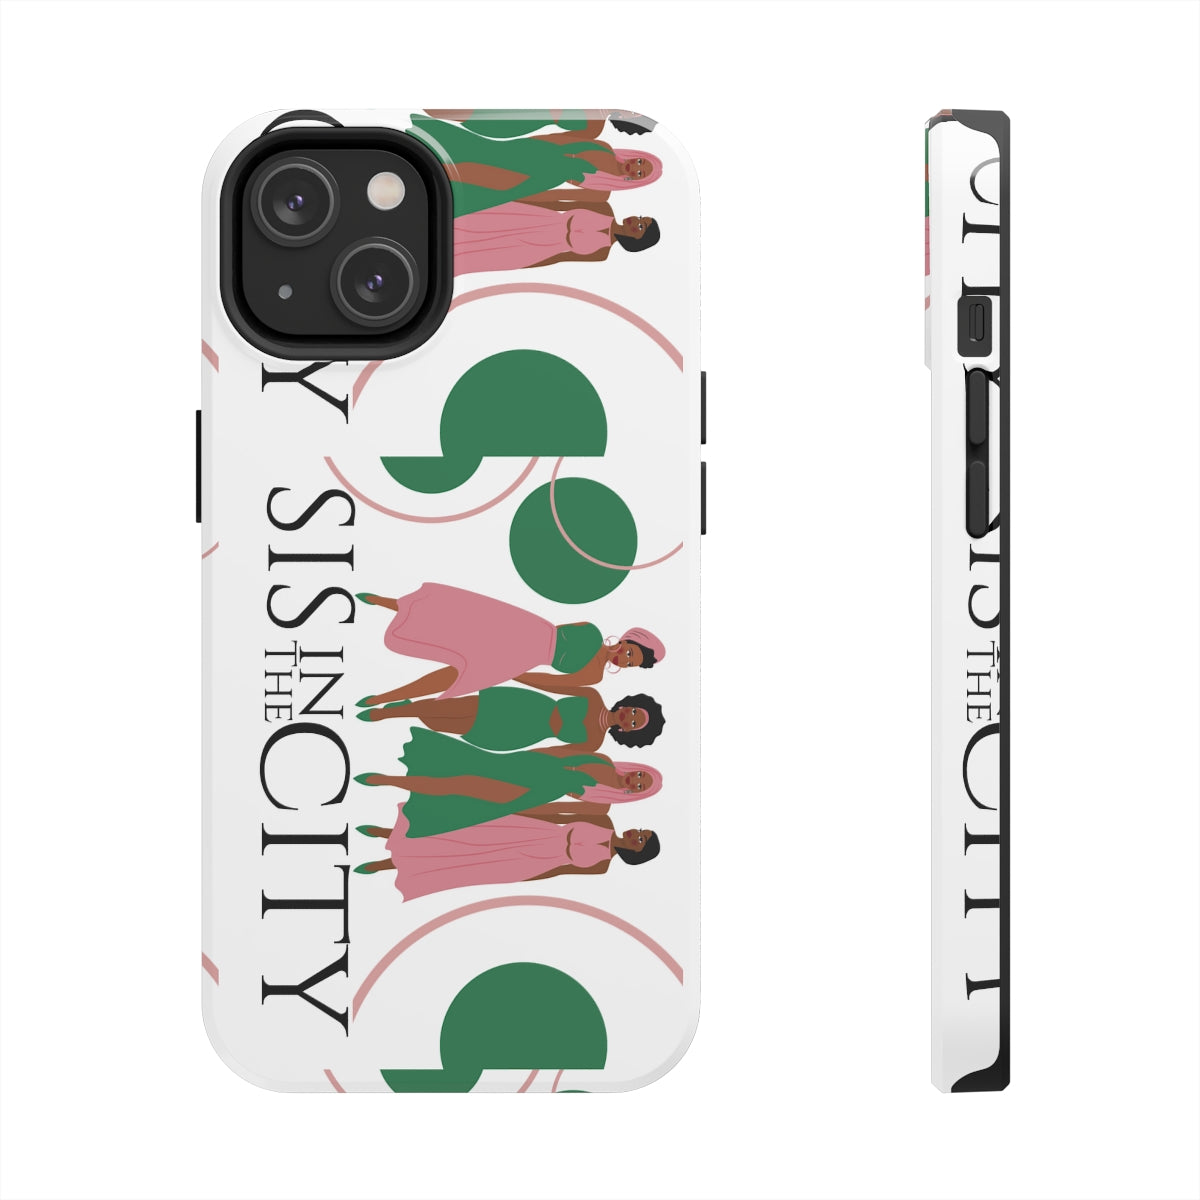 "Sis In The City" AKA IPhone Cases, Case-Mate